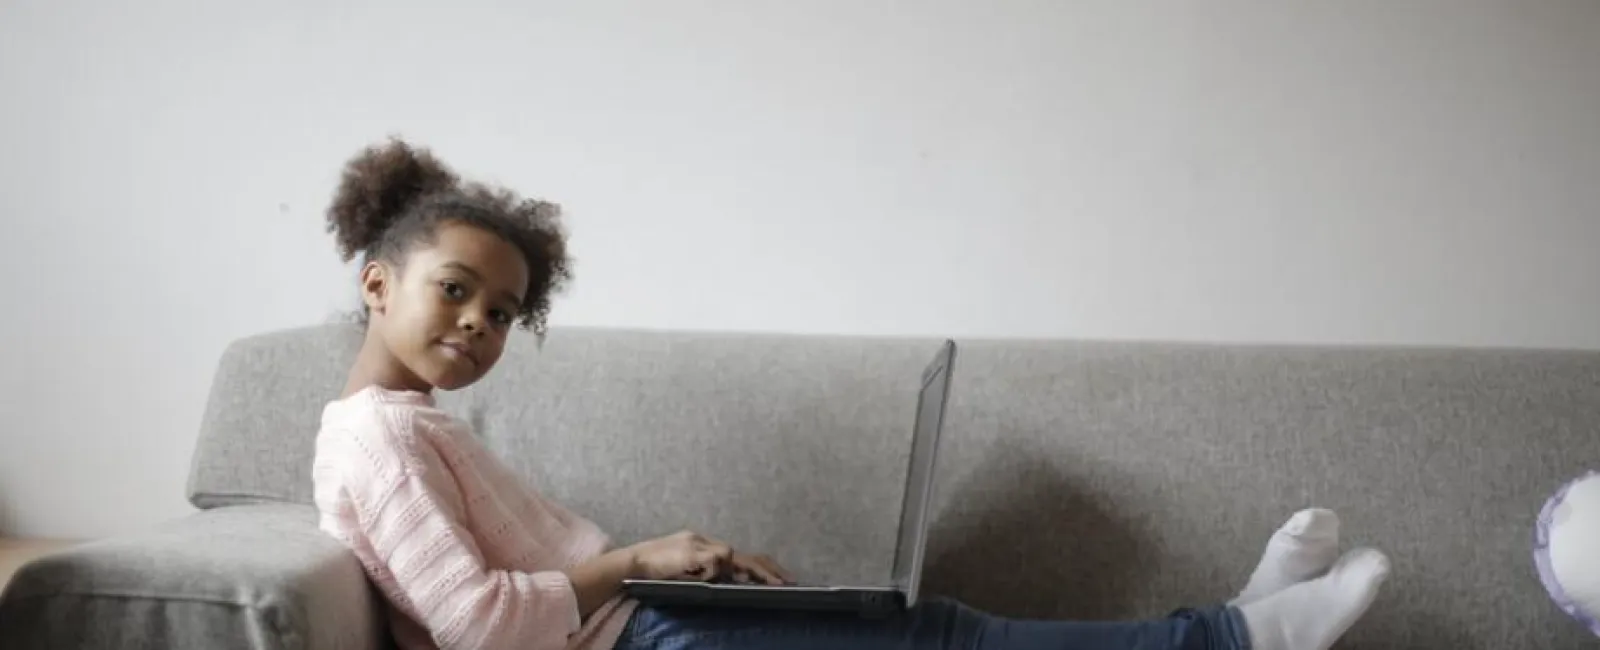 a girl sitting on a couch using a laptop